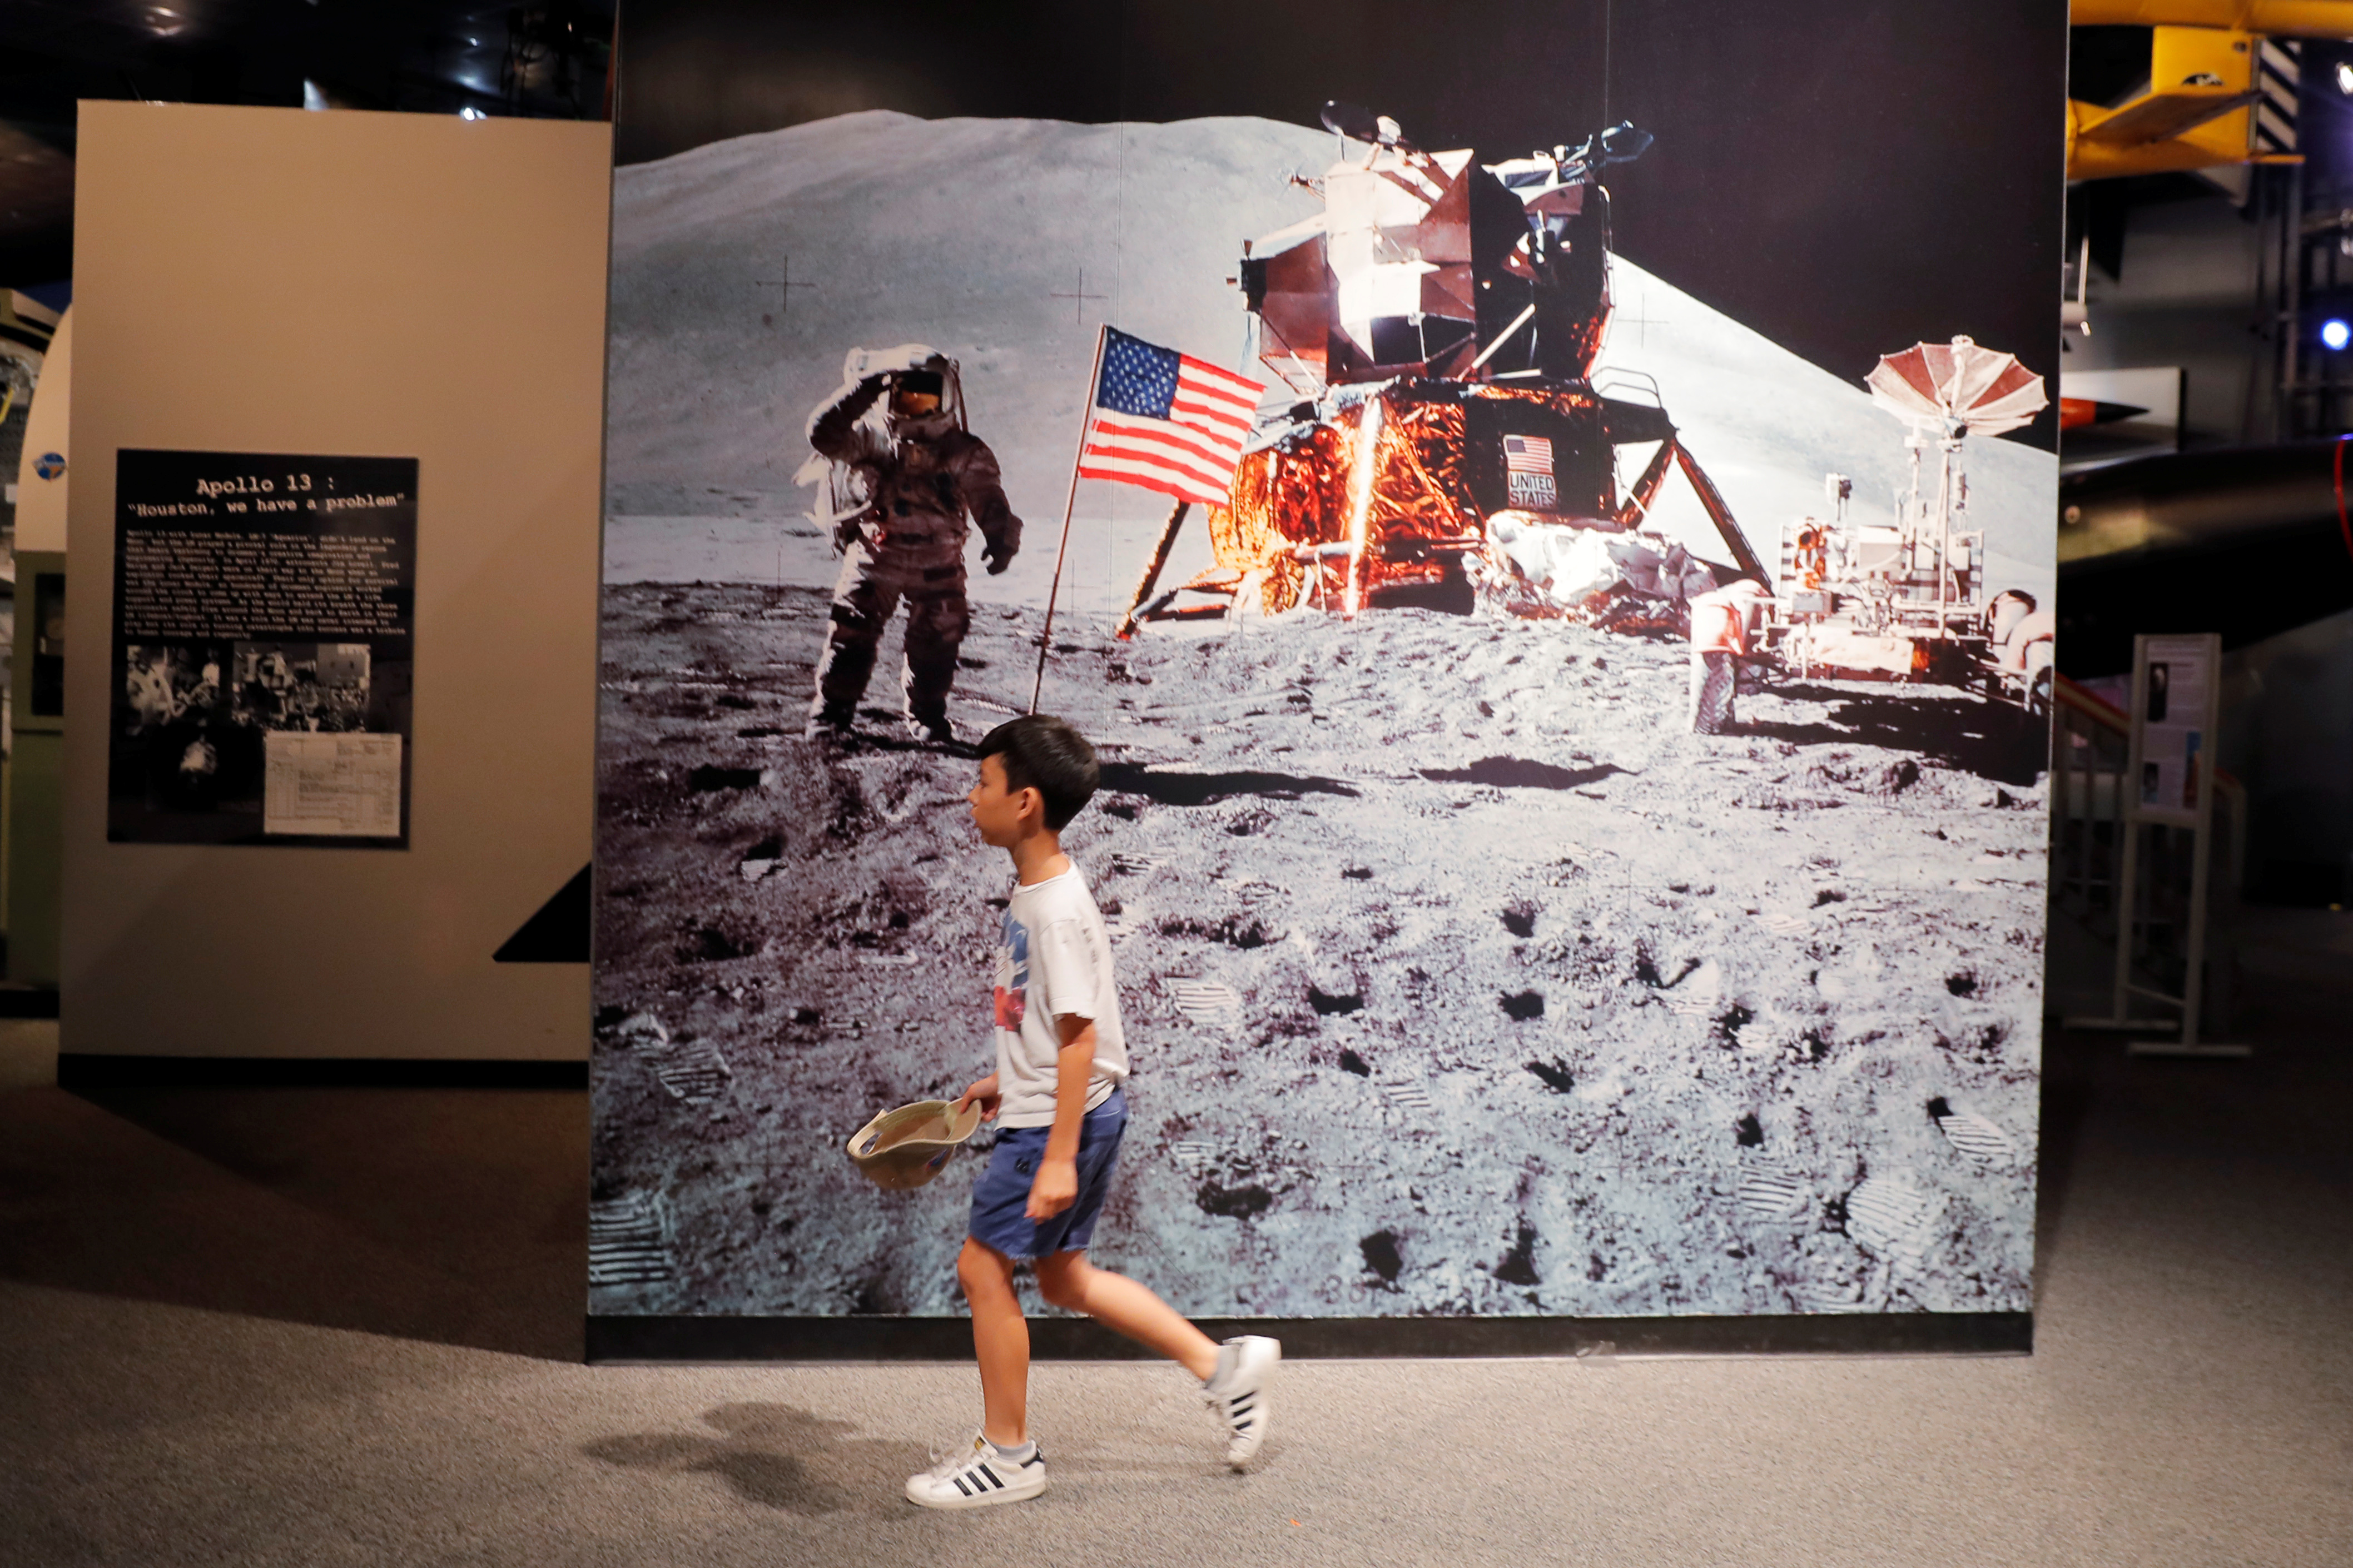 A young boy walks past a photograph of Buzz Aldrin on the surface of the moon during the Apollo 11 mission at the Cradle of Aviation Museum in Garden City, New York